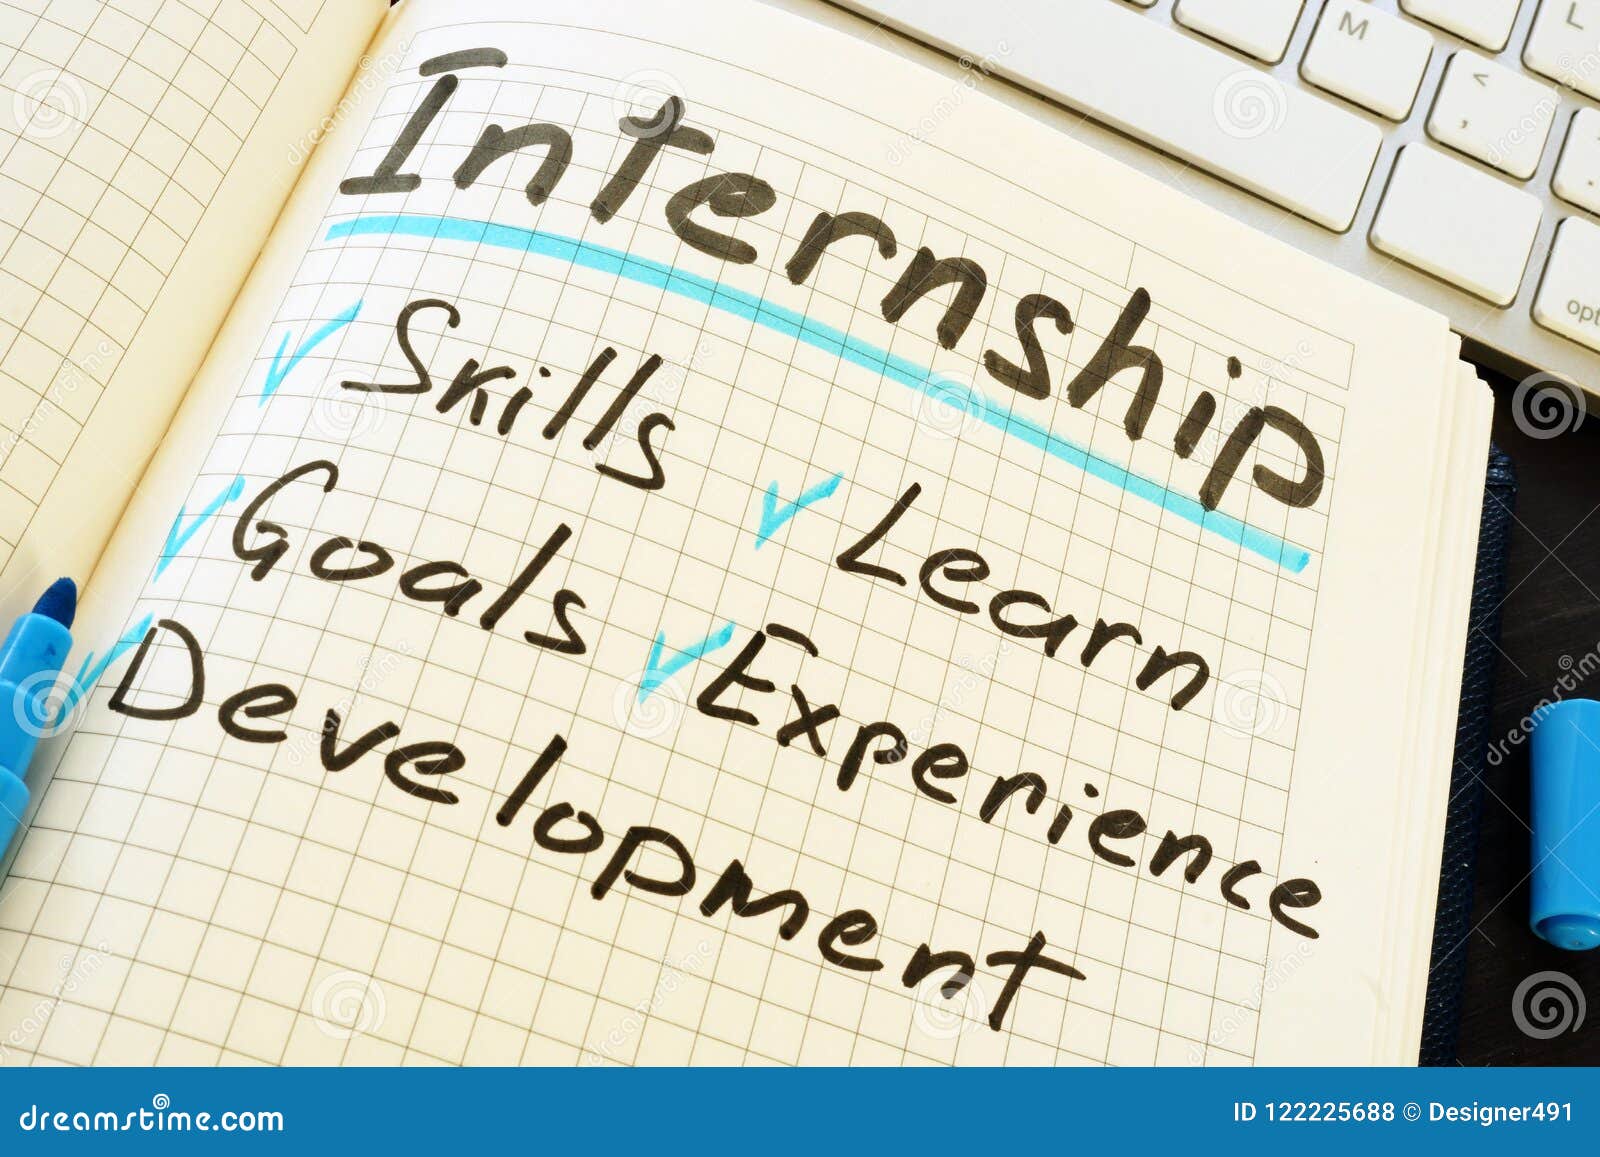 internship and list of pros written in the note.